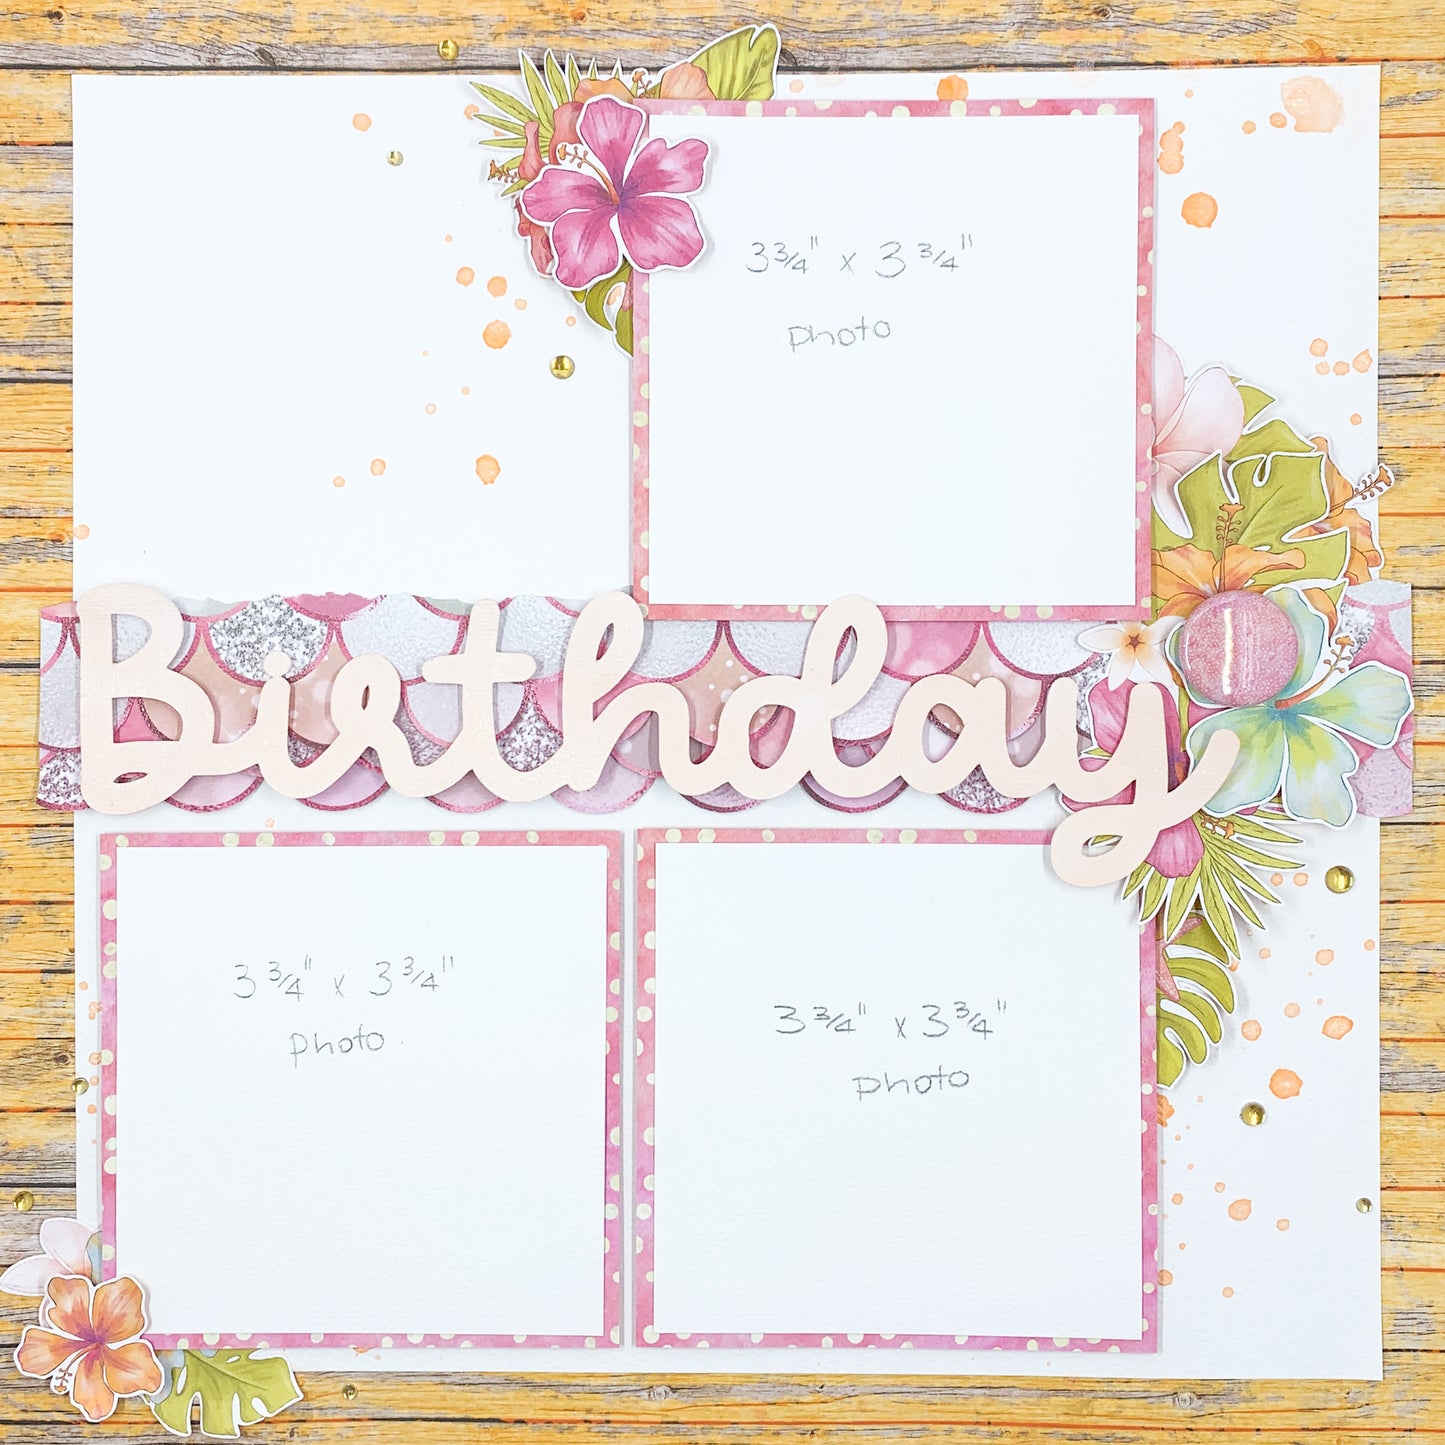 Tropicana - Birthday (large) 9.5"x2.75" White Linen Cardstock Title-Cut - Designed by Alicia Redshaw